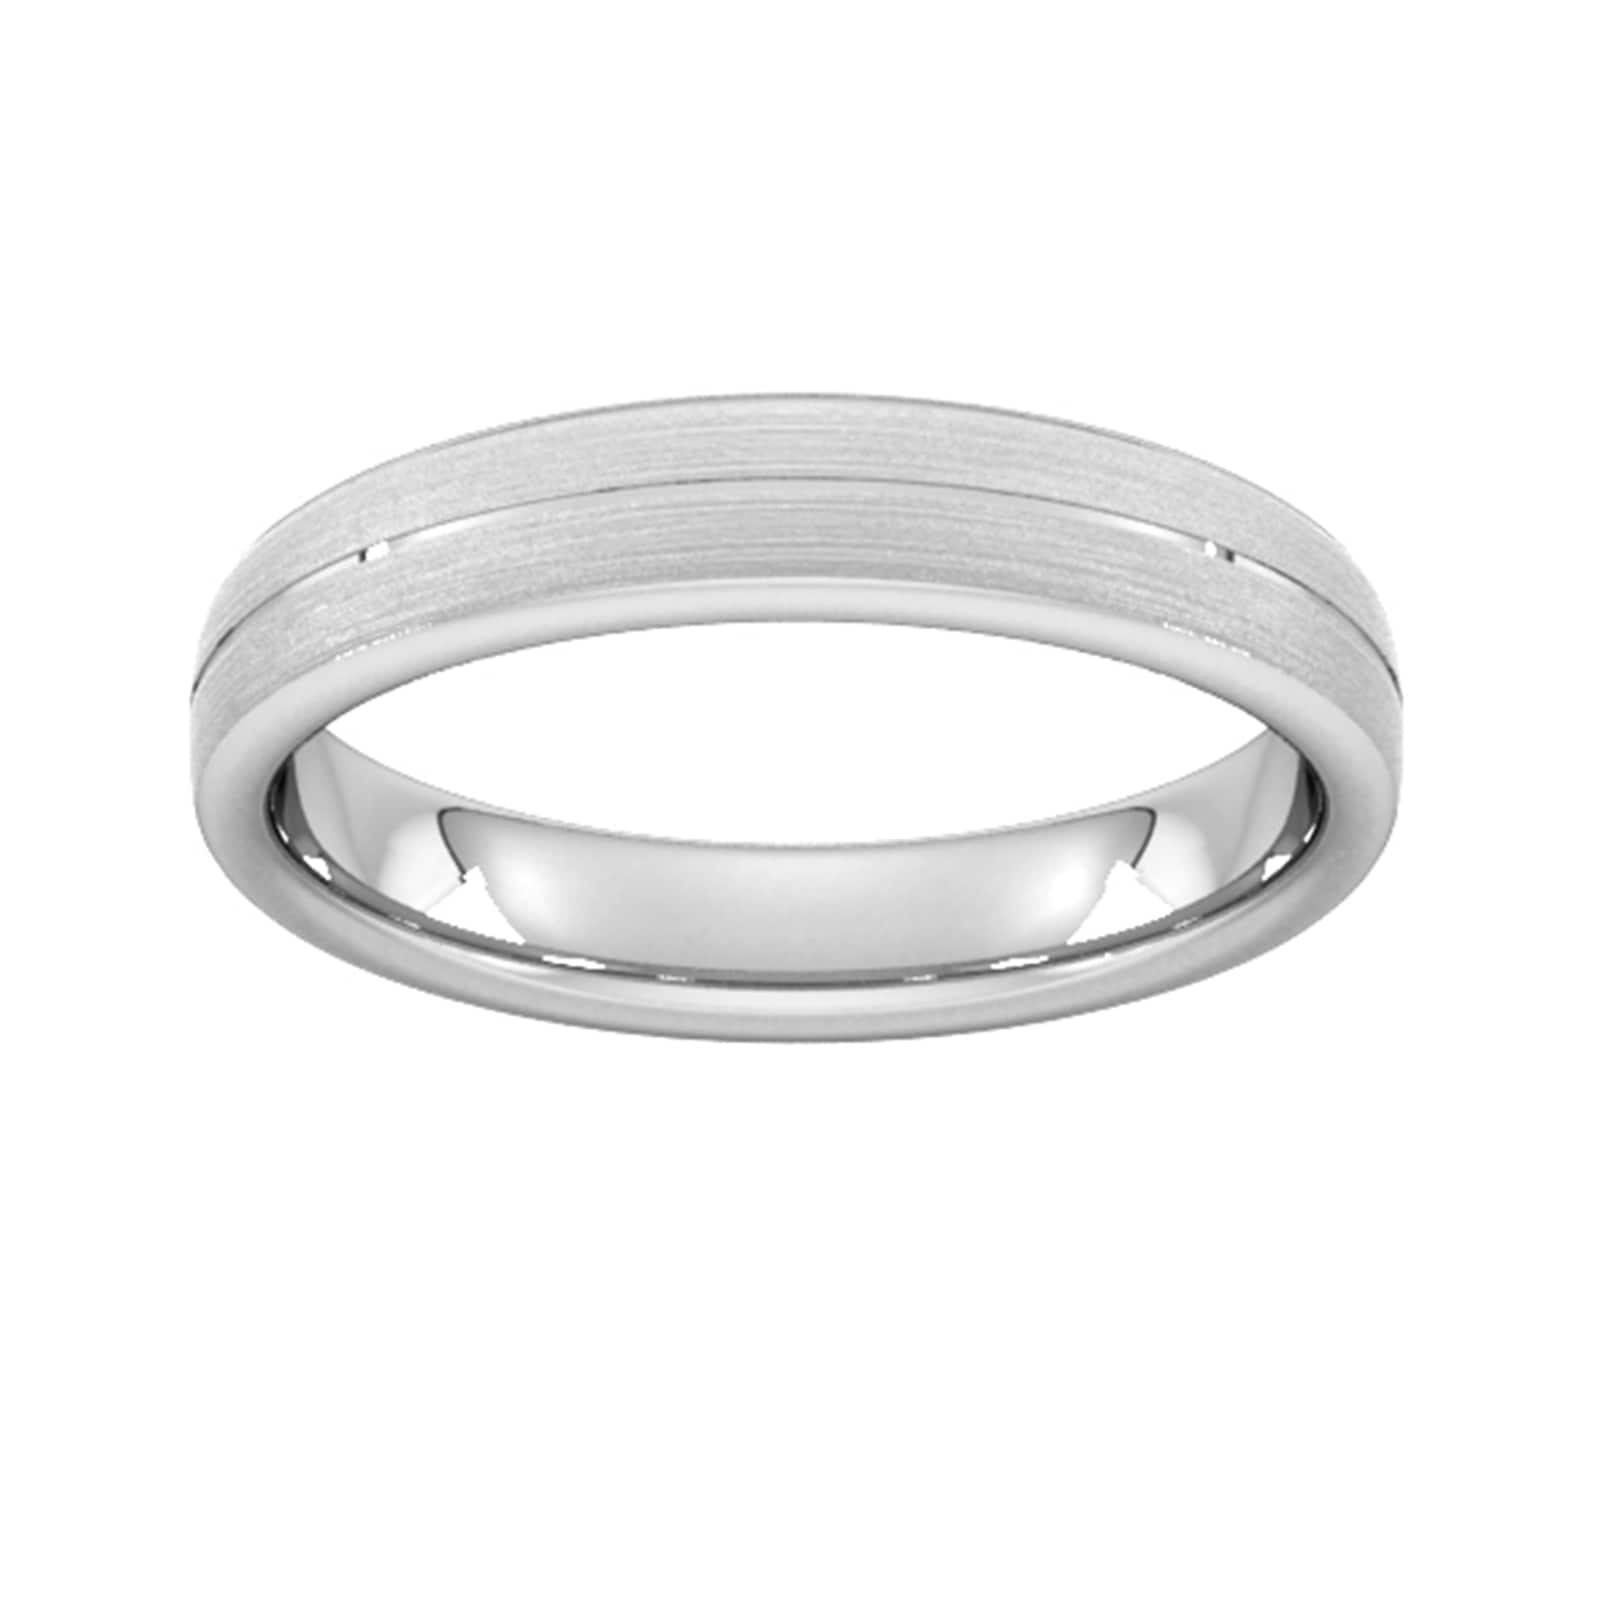 4mm Slight Court Heavy Centre Groove With Chamfered Edge Wedding Ring In 950 Palladium - Ring Size W